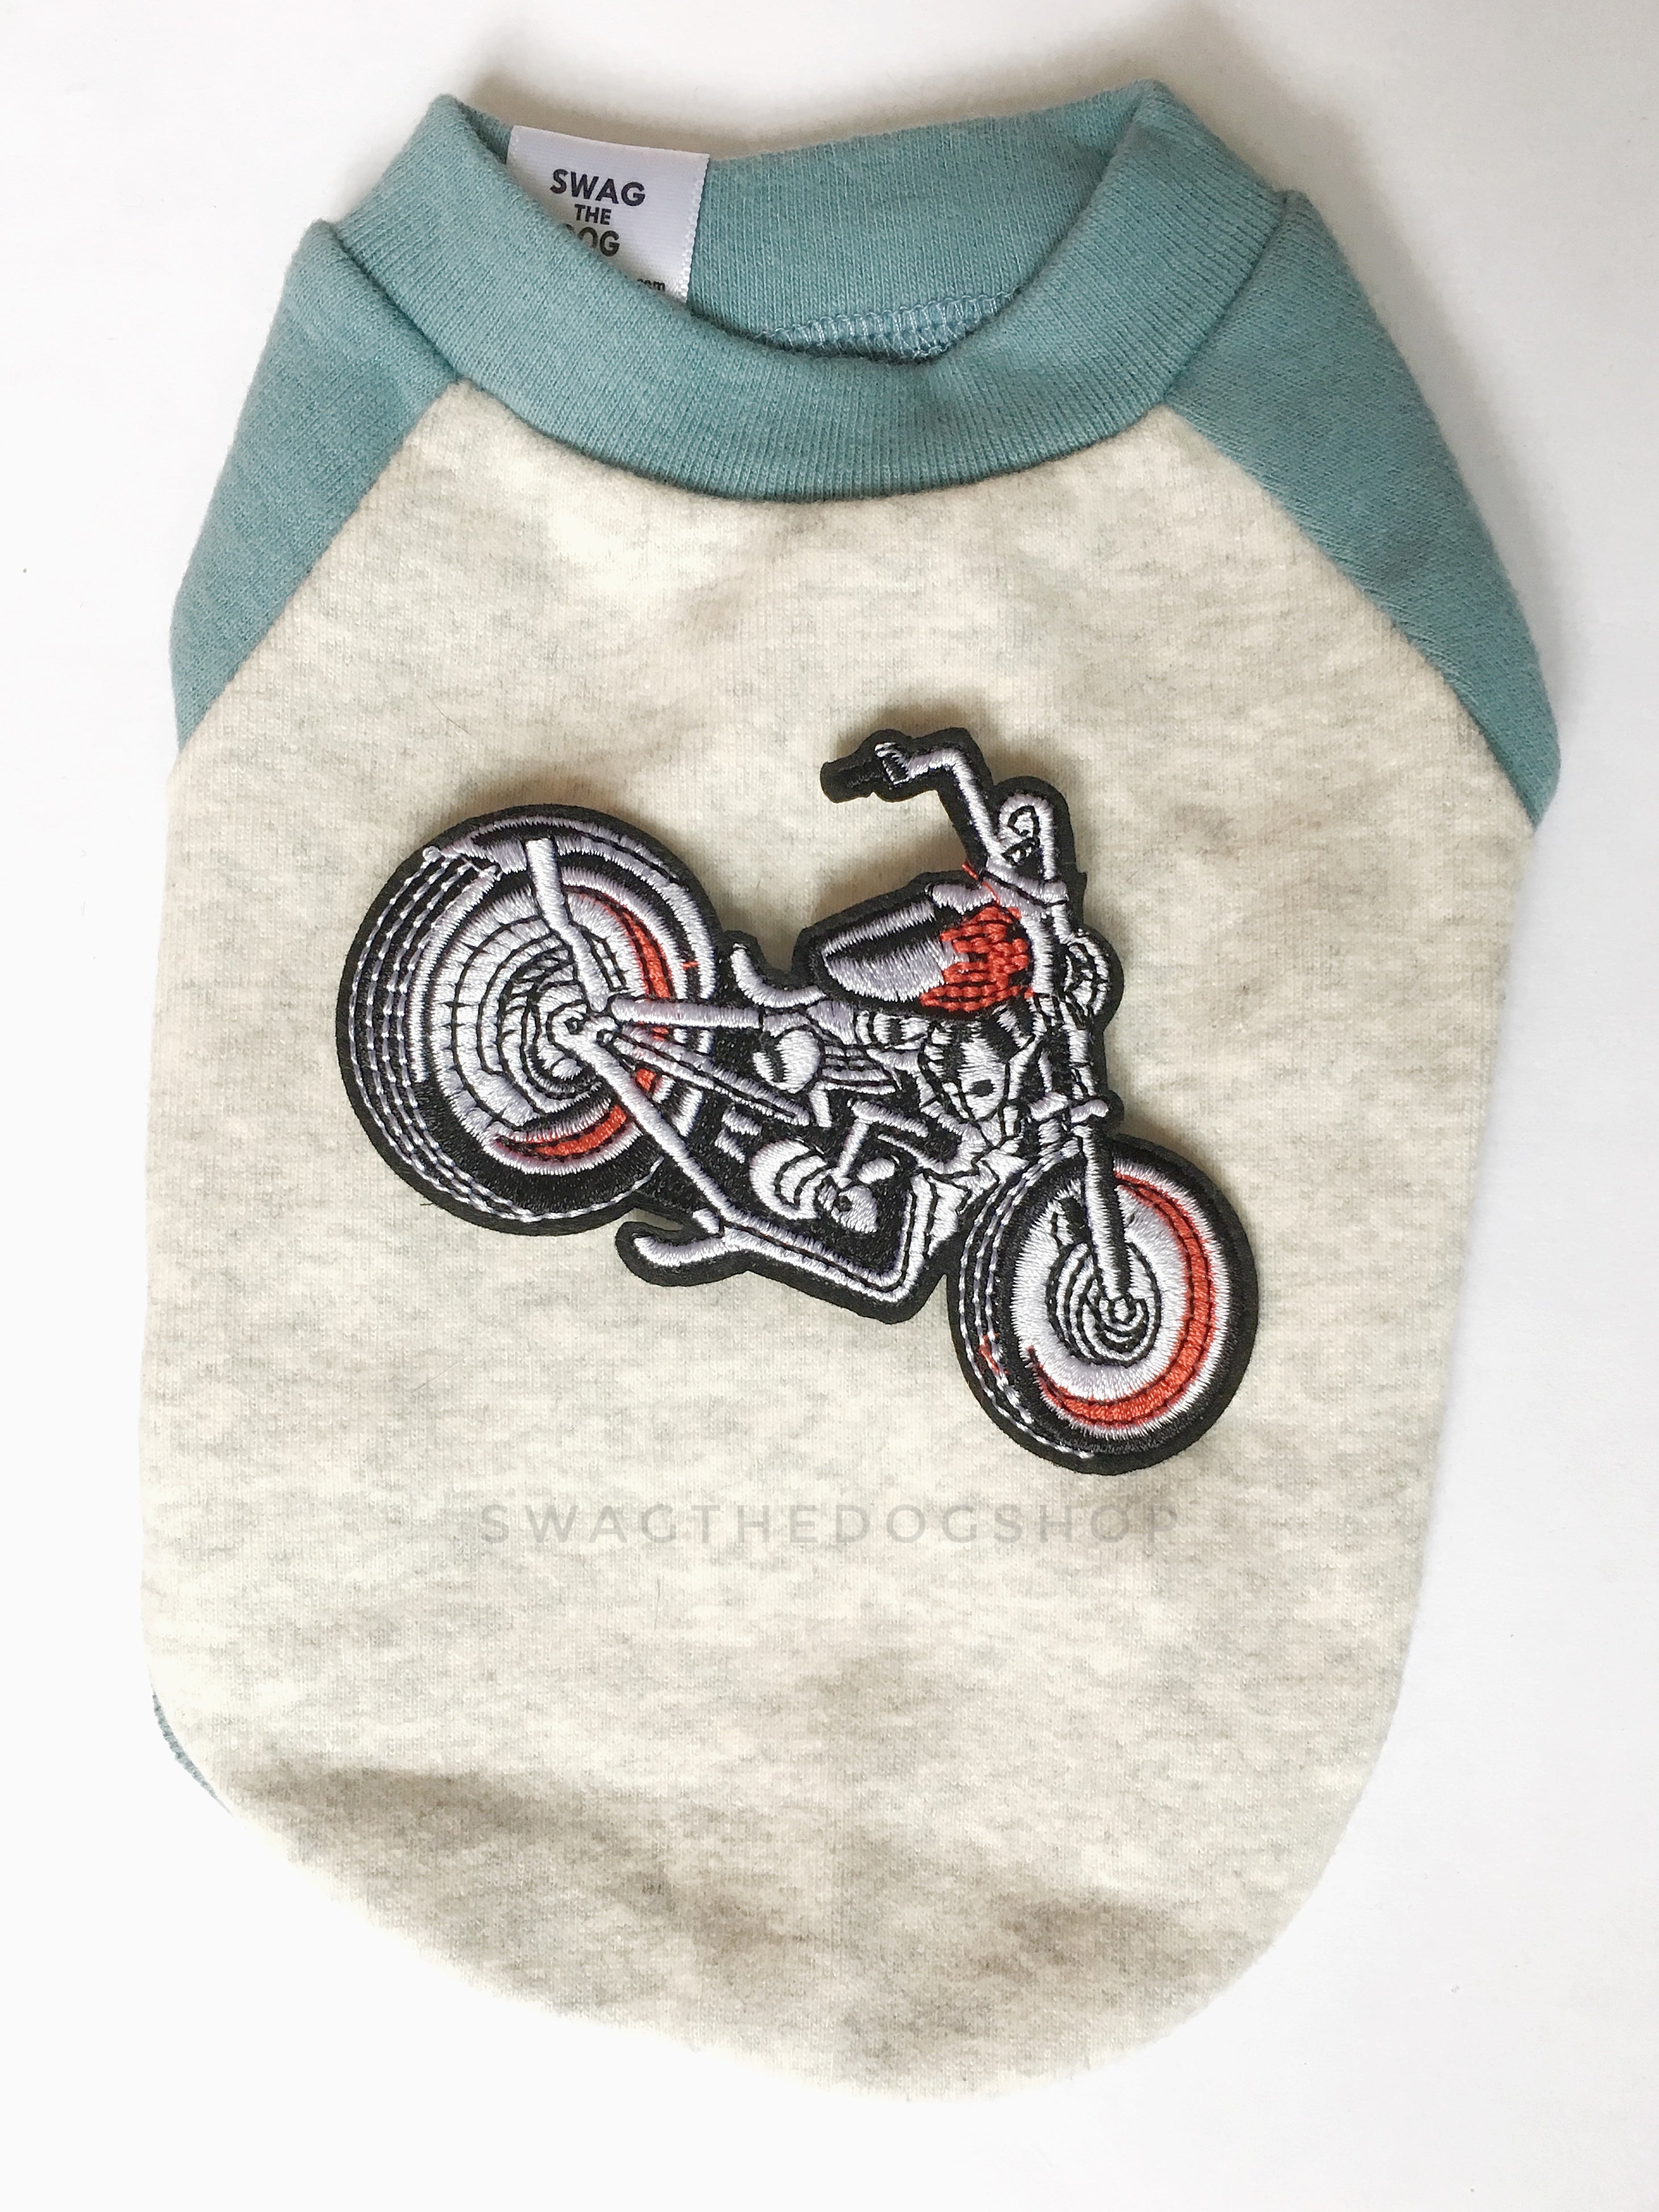 Baby Blue and Gray Centerfield Tees T-Shirt - Patch Add-on of Motorcycle. Baby Blue and Gray T-Shirt